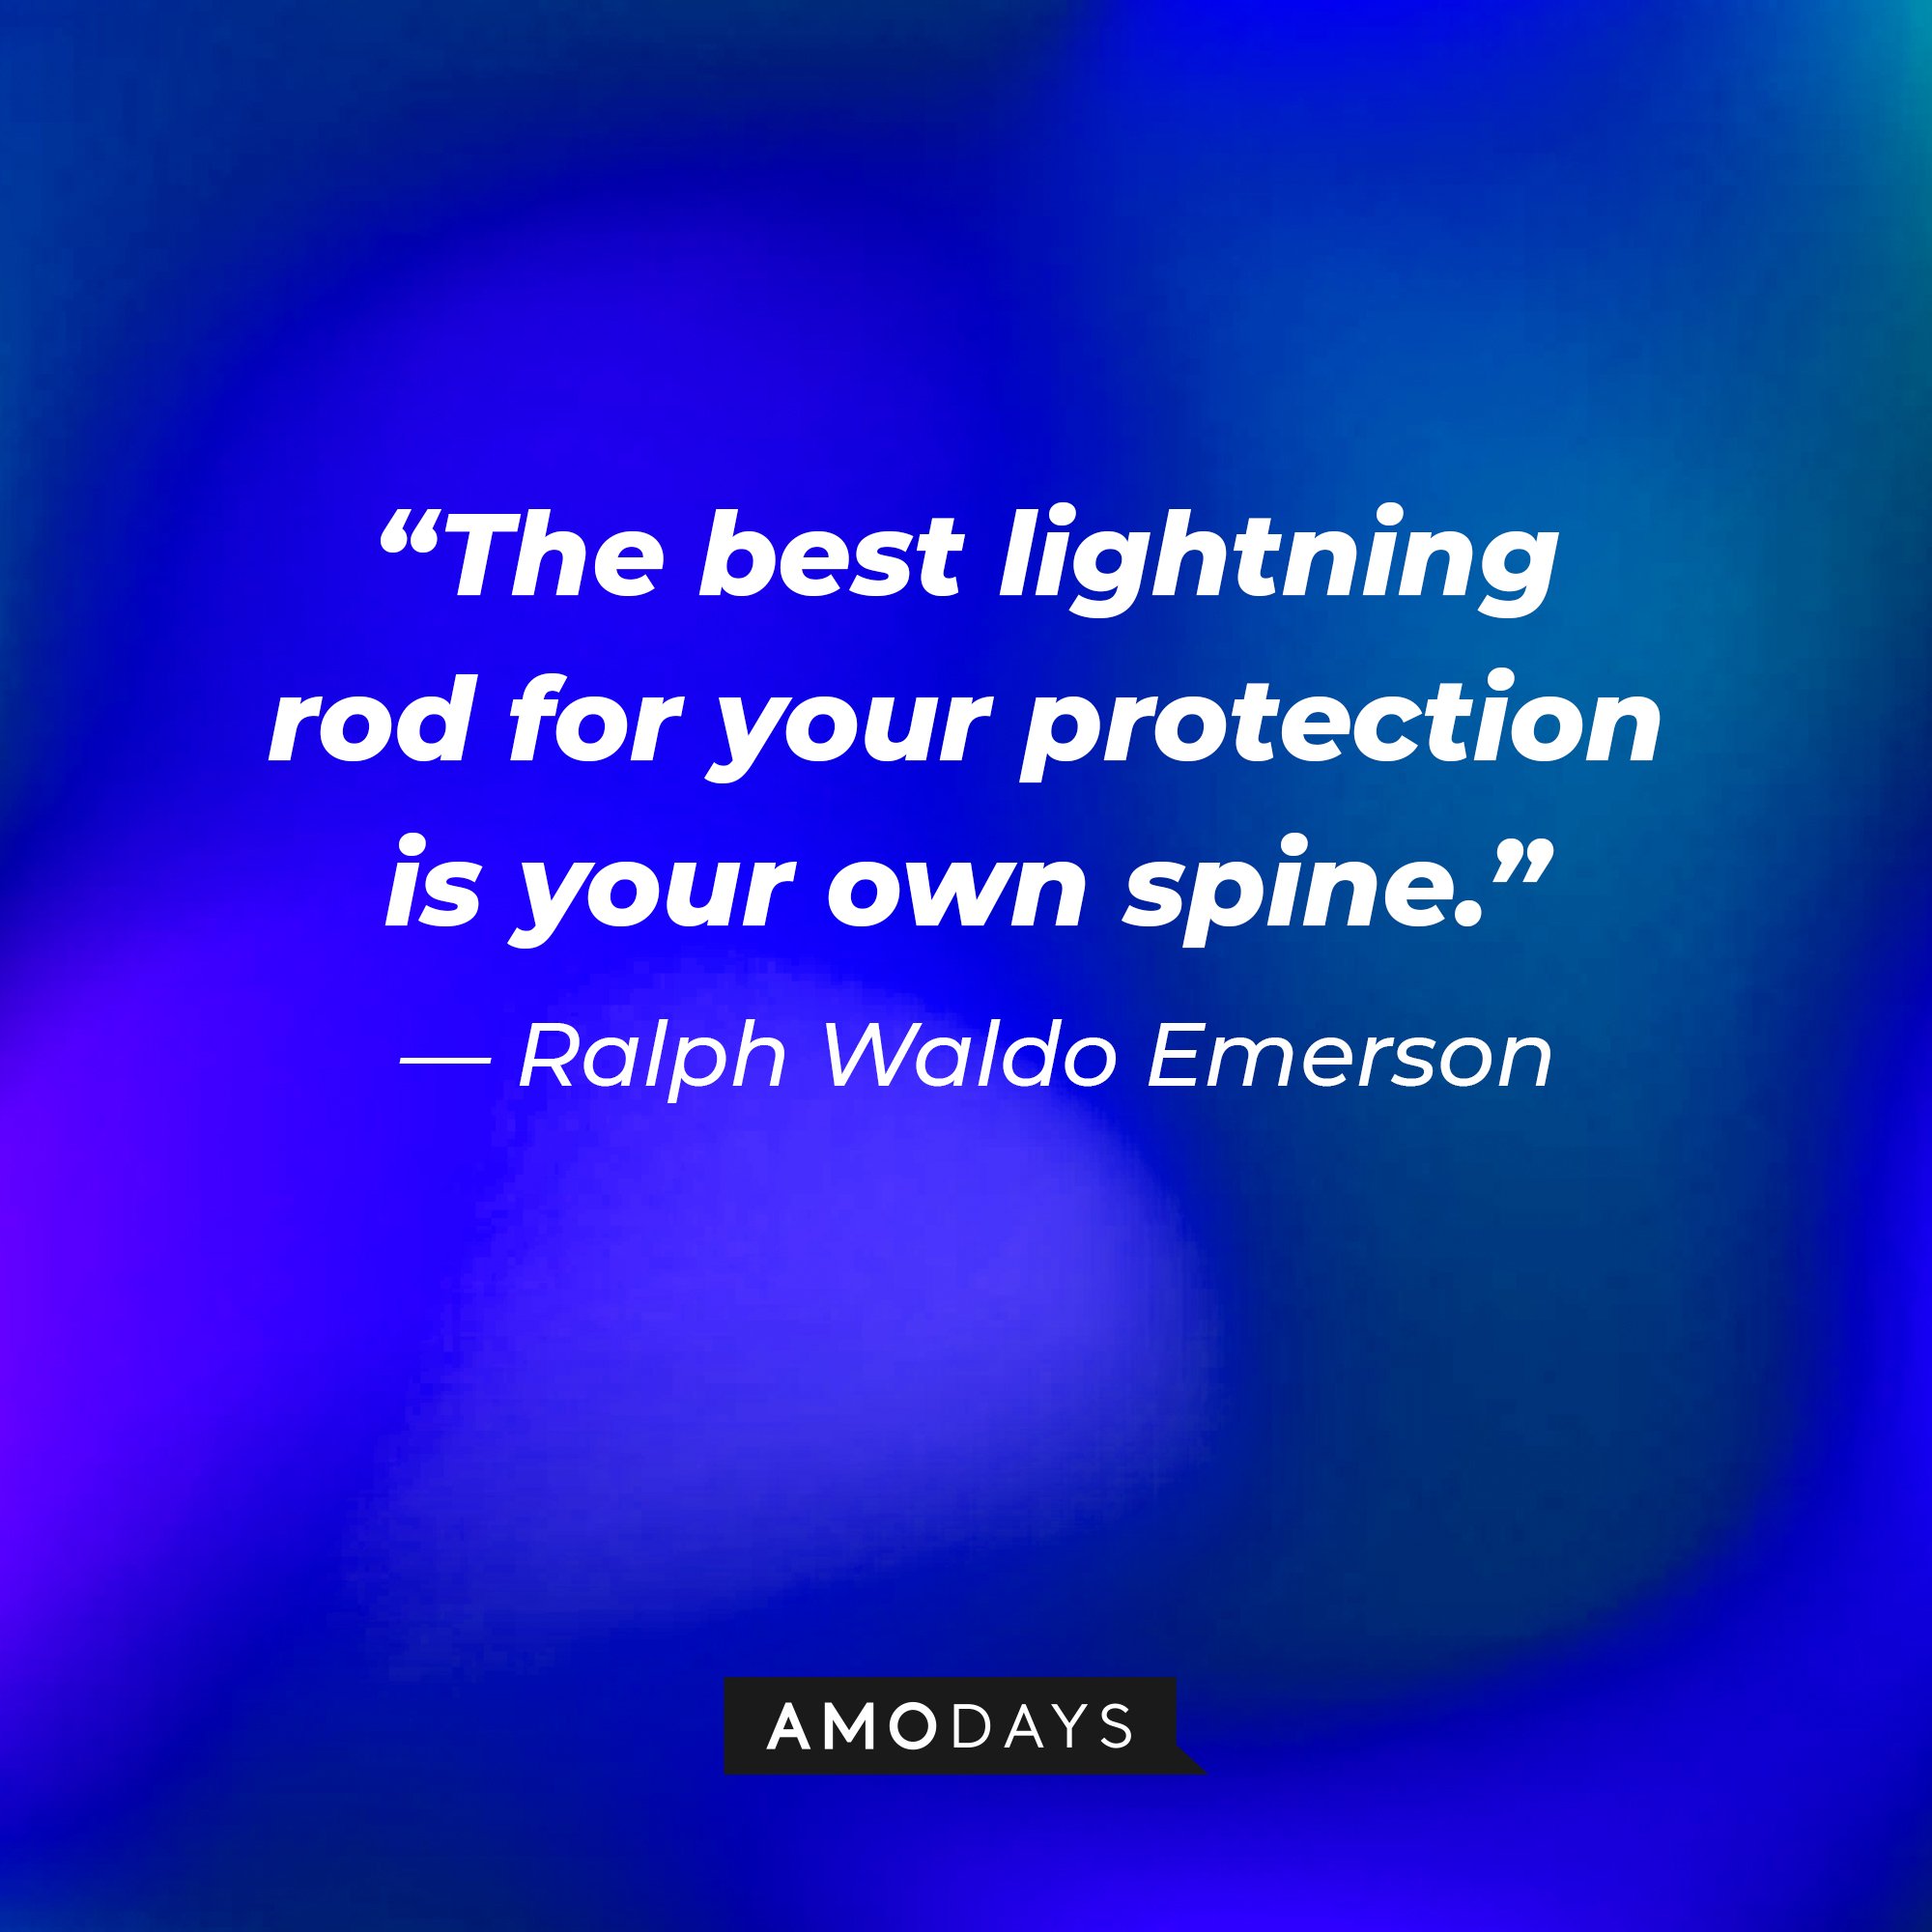 Ralph Waldo Emerson’s quote: “The best lightning rod for your protection is your own spine.” | Image: AmoDays